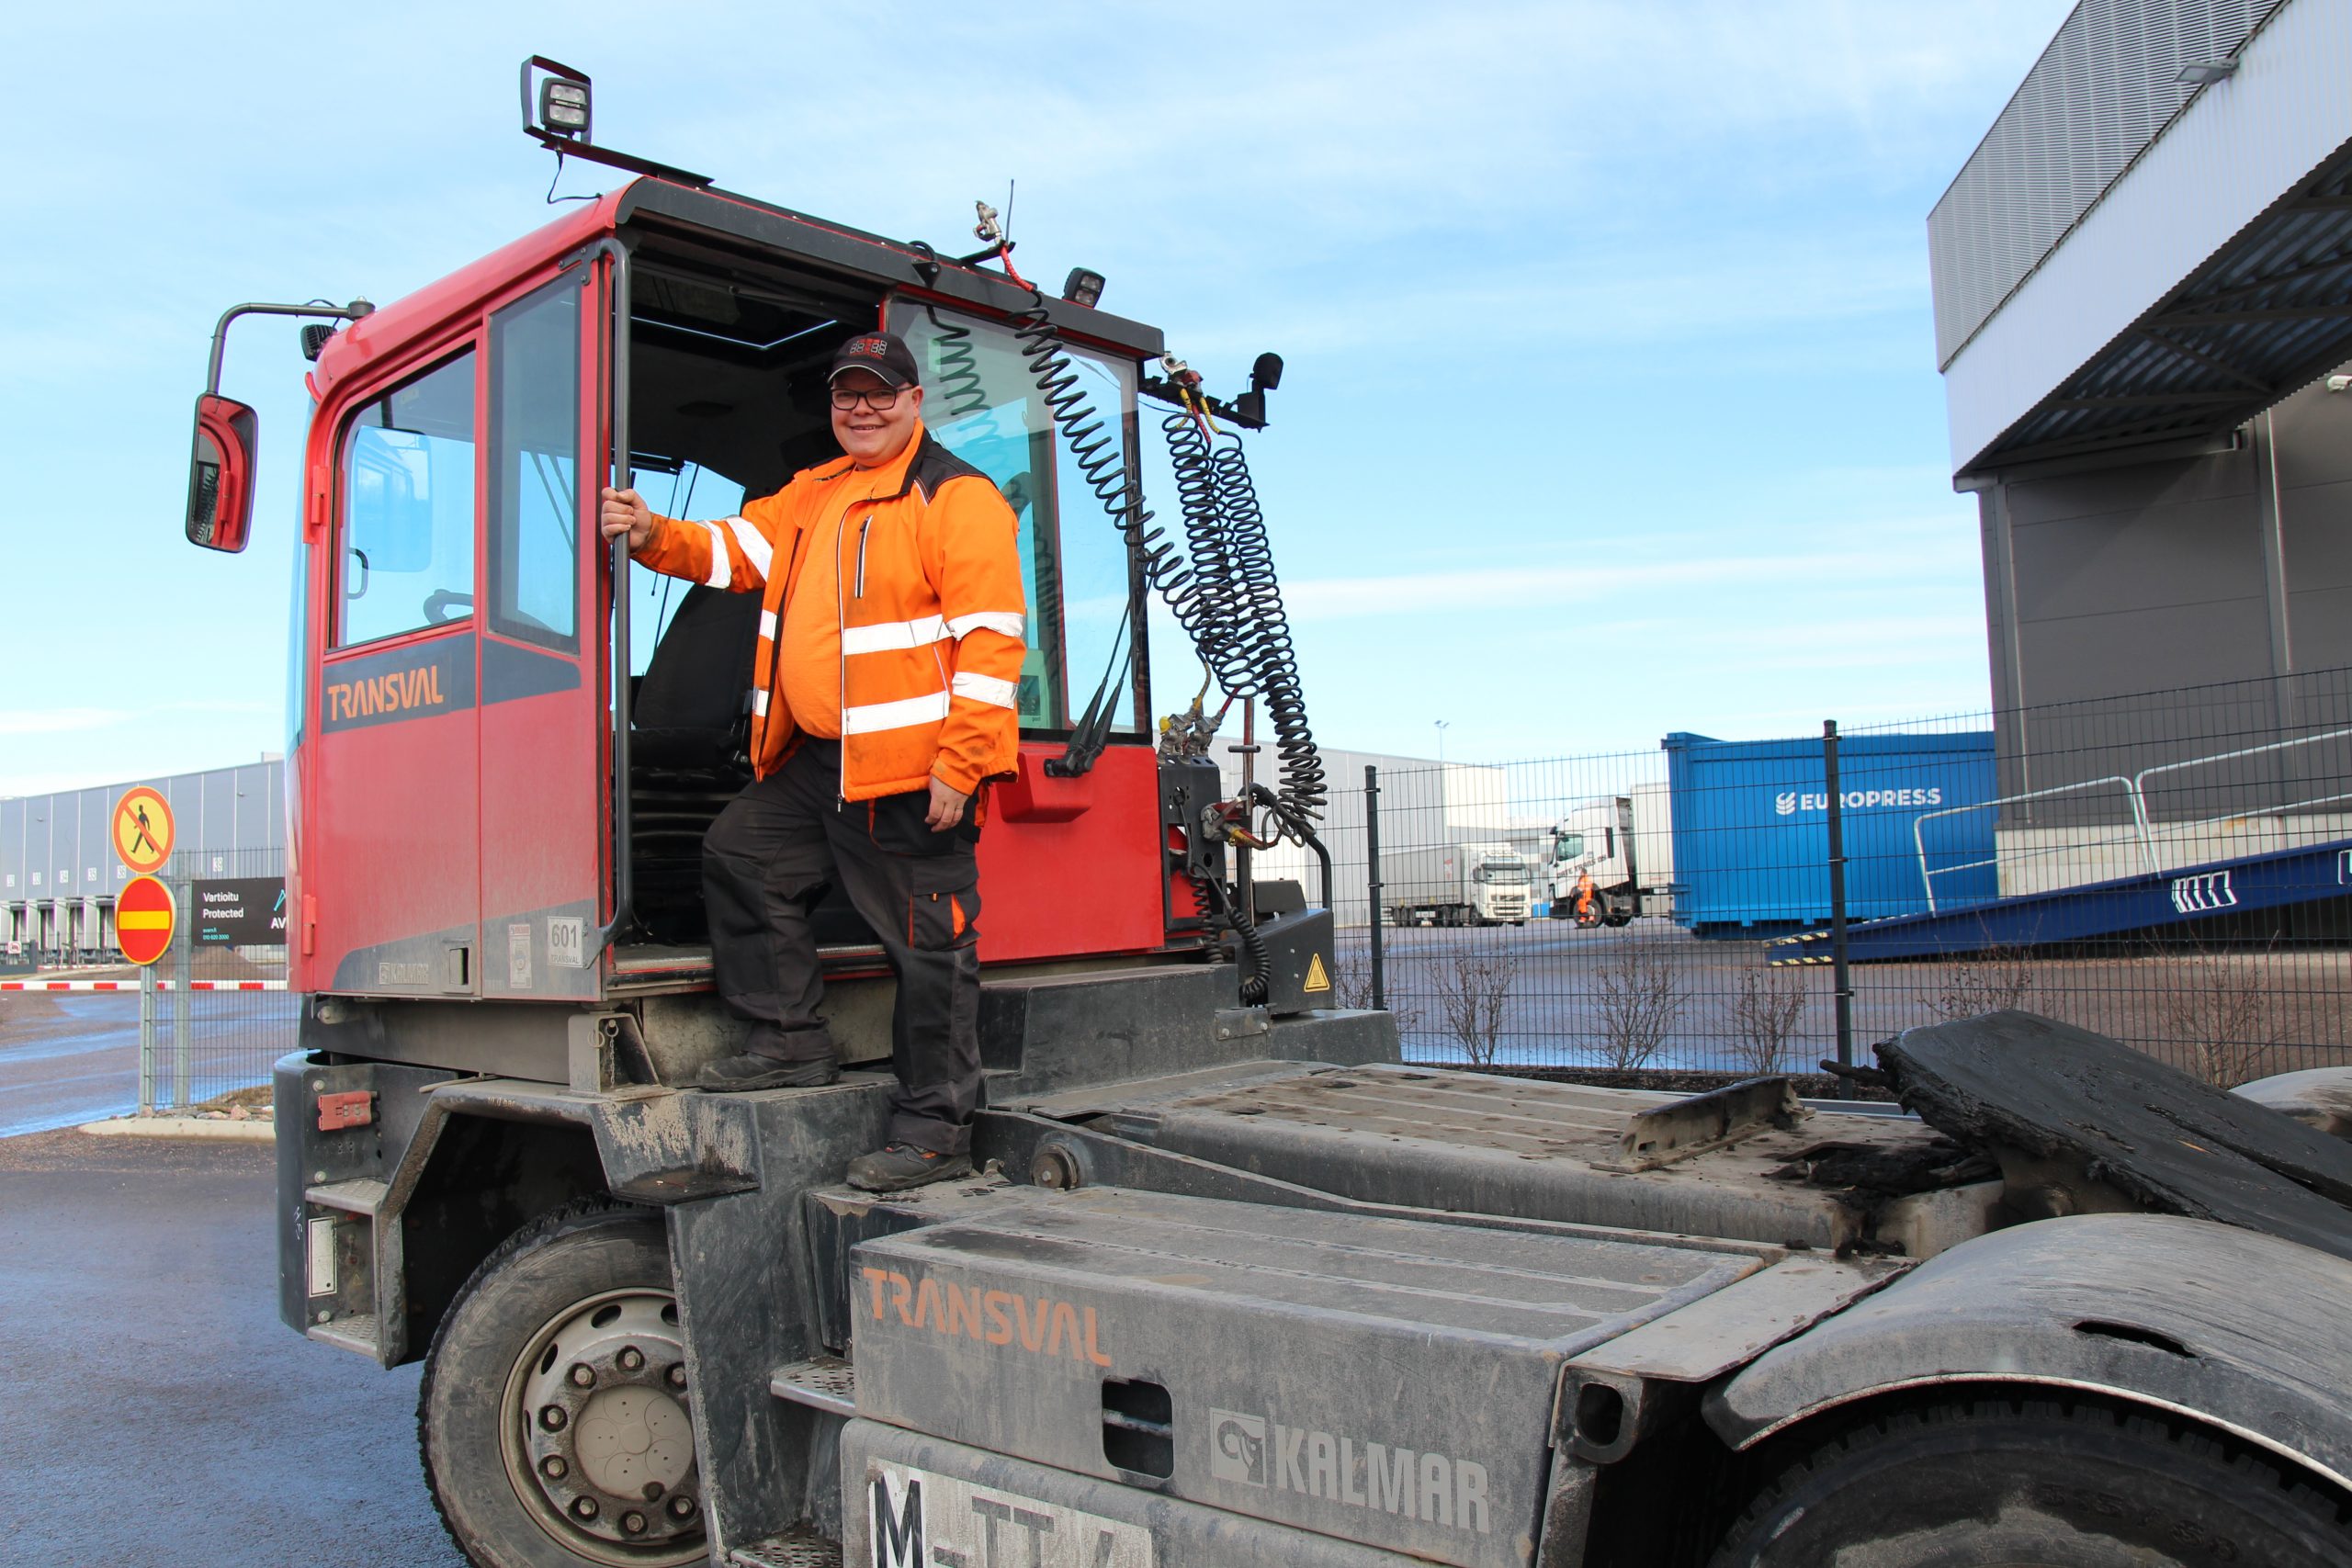 The driver of the traction master is in charge of a 12 000 kg machine and a large part of the freight transported in Finland